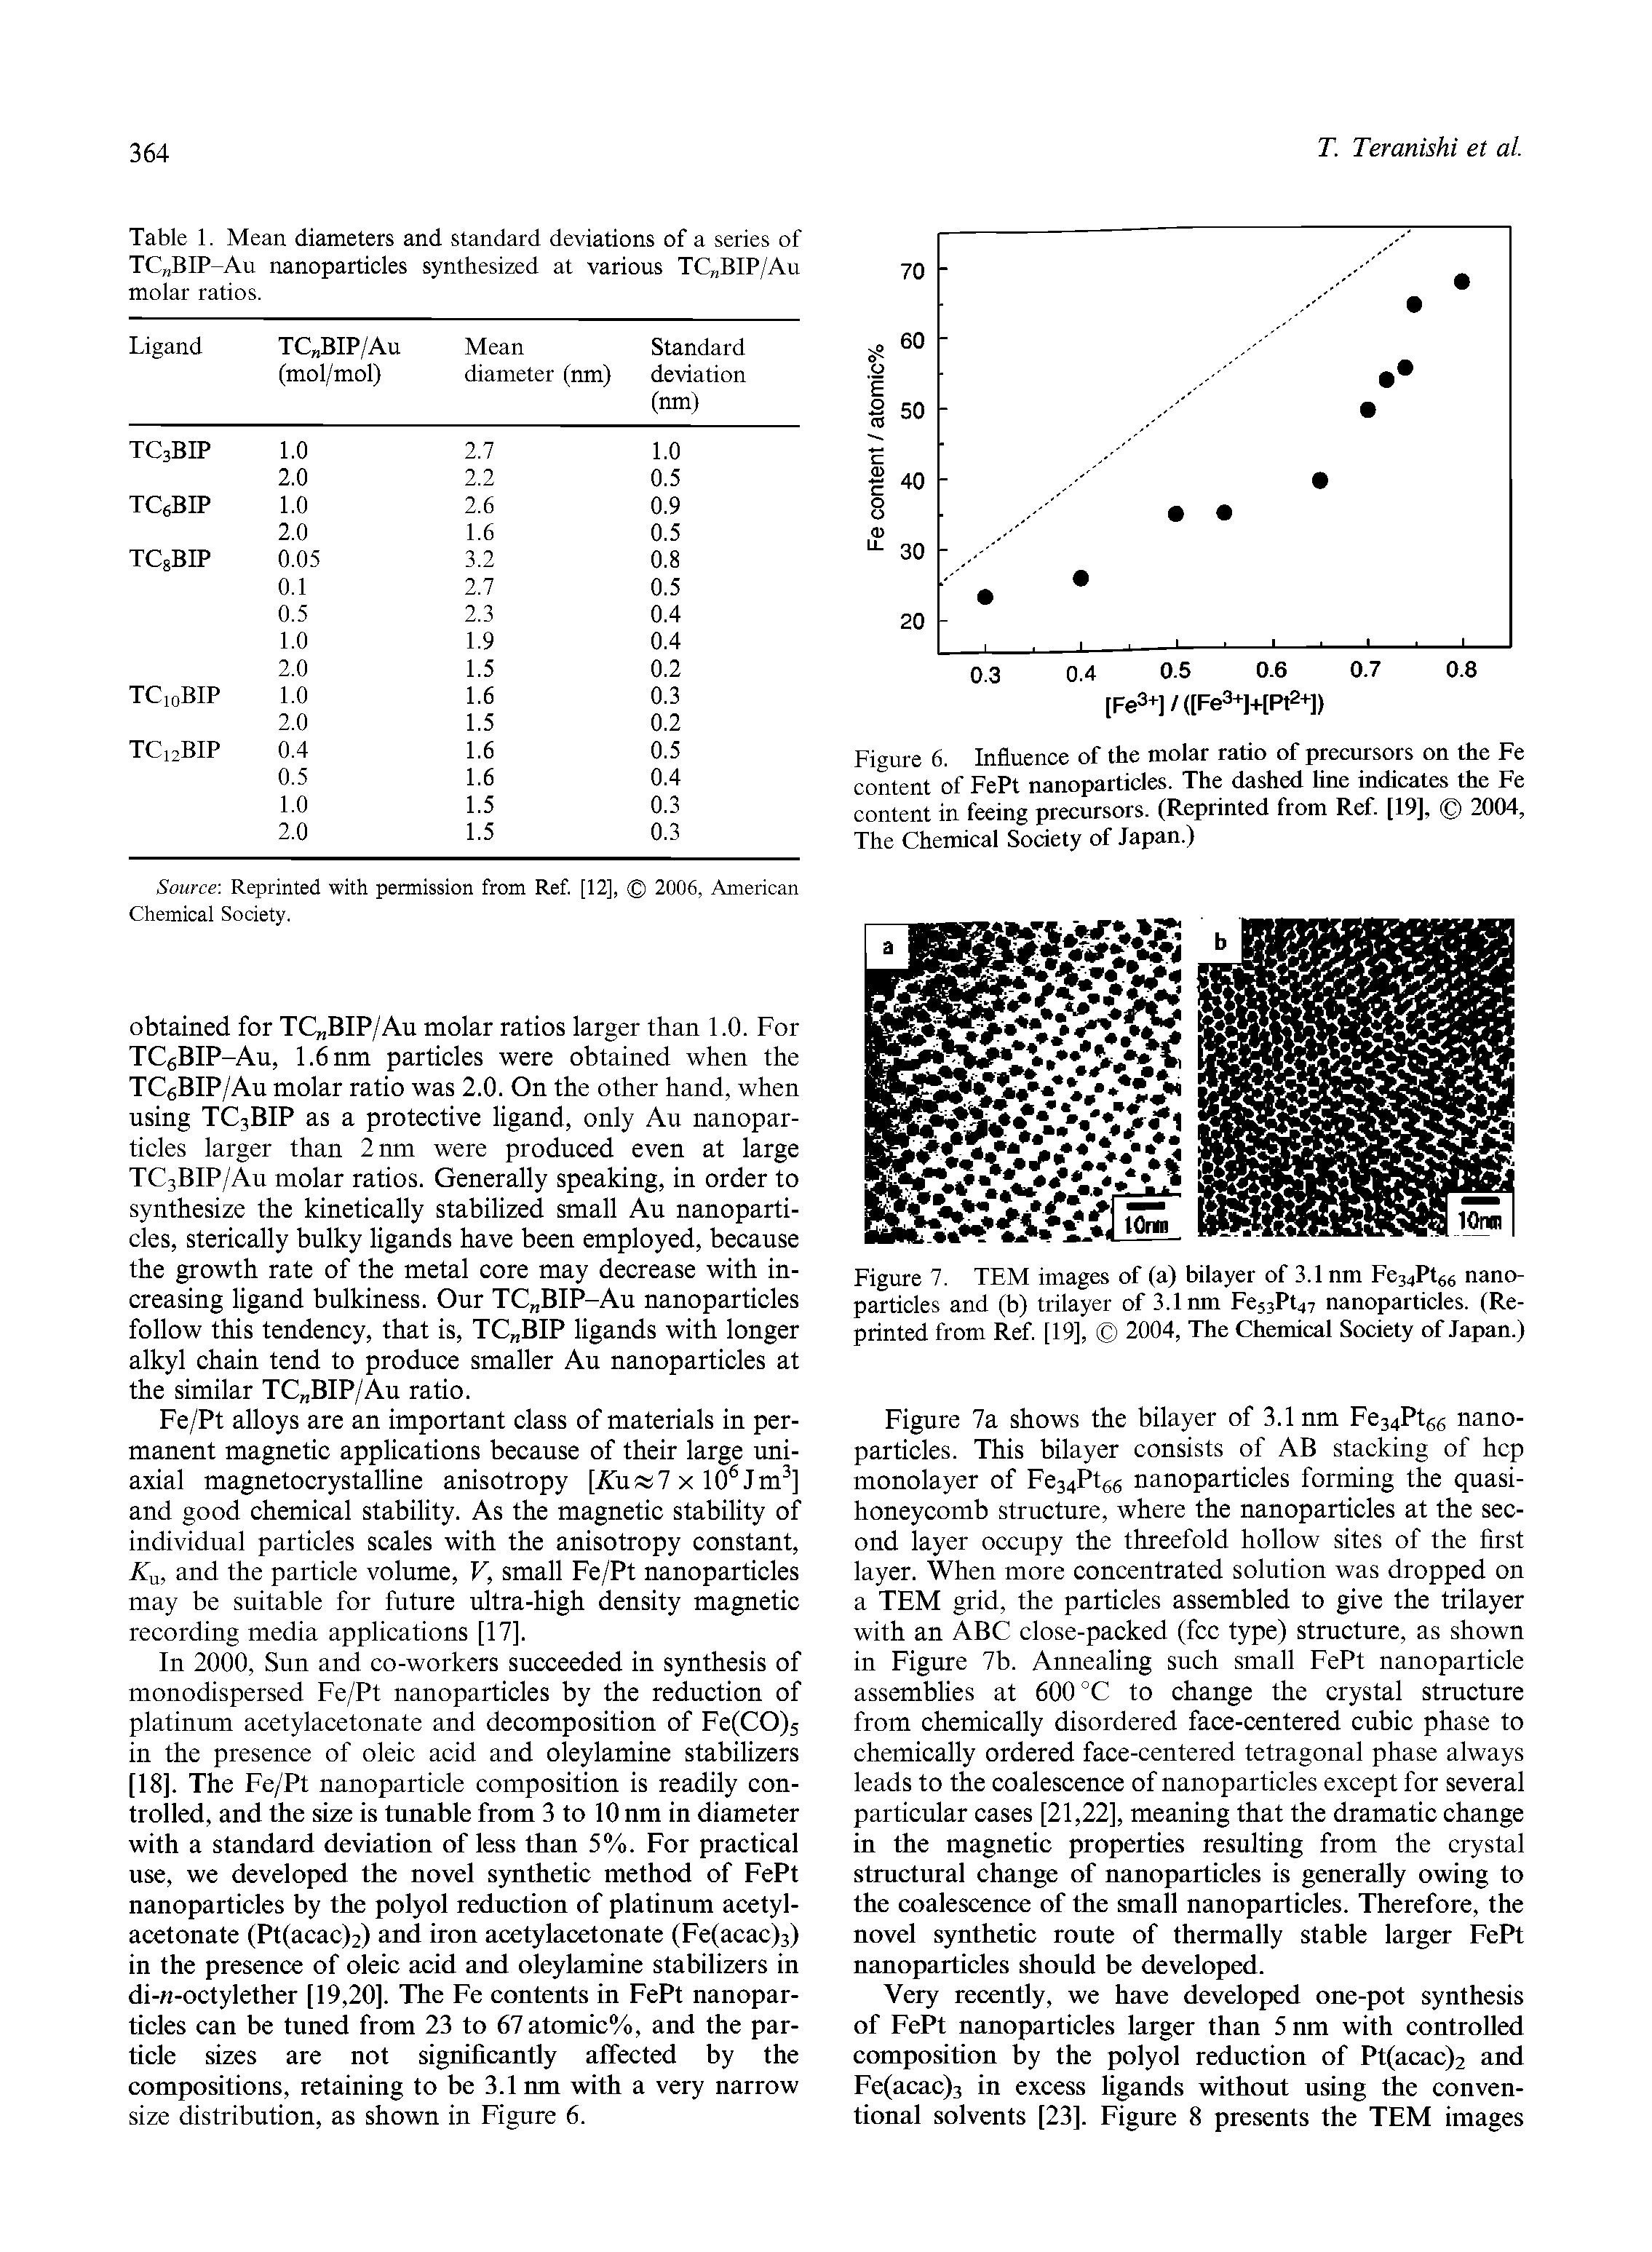 Figure 6. Influence of the molar ratio of precursors on the Fe content of FePt nanoparticles. The dashed line indicates the Fe content in feeing precursors. (Reprinted from Ref. [19], 2004, The Chemical Society of Japan.)...